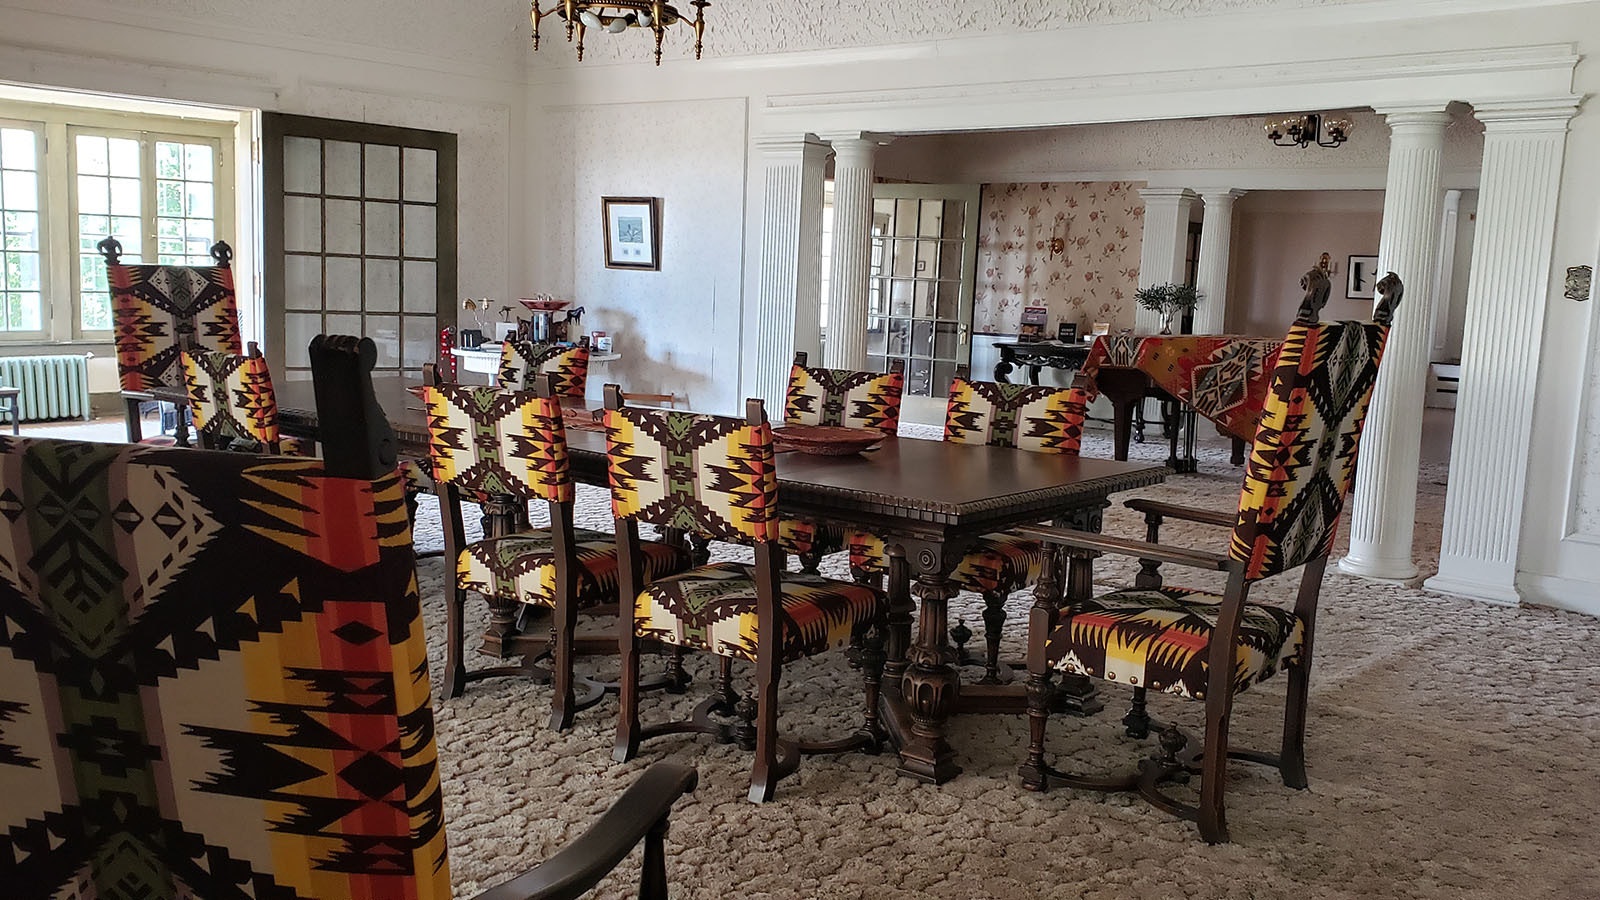 The ranch's original dining room table and chairs.